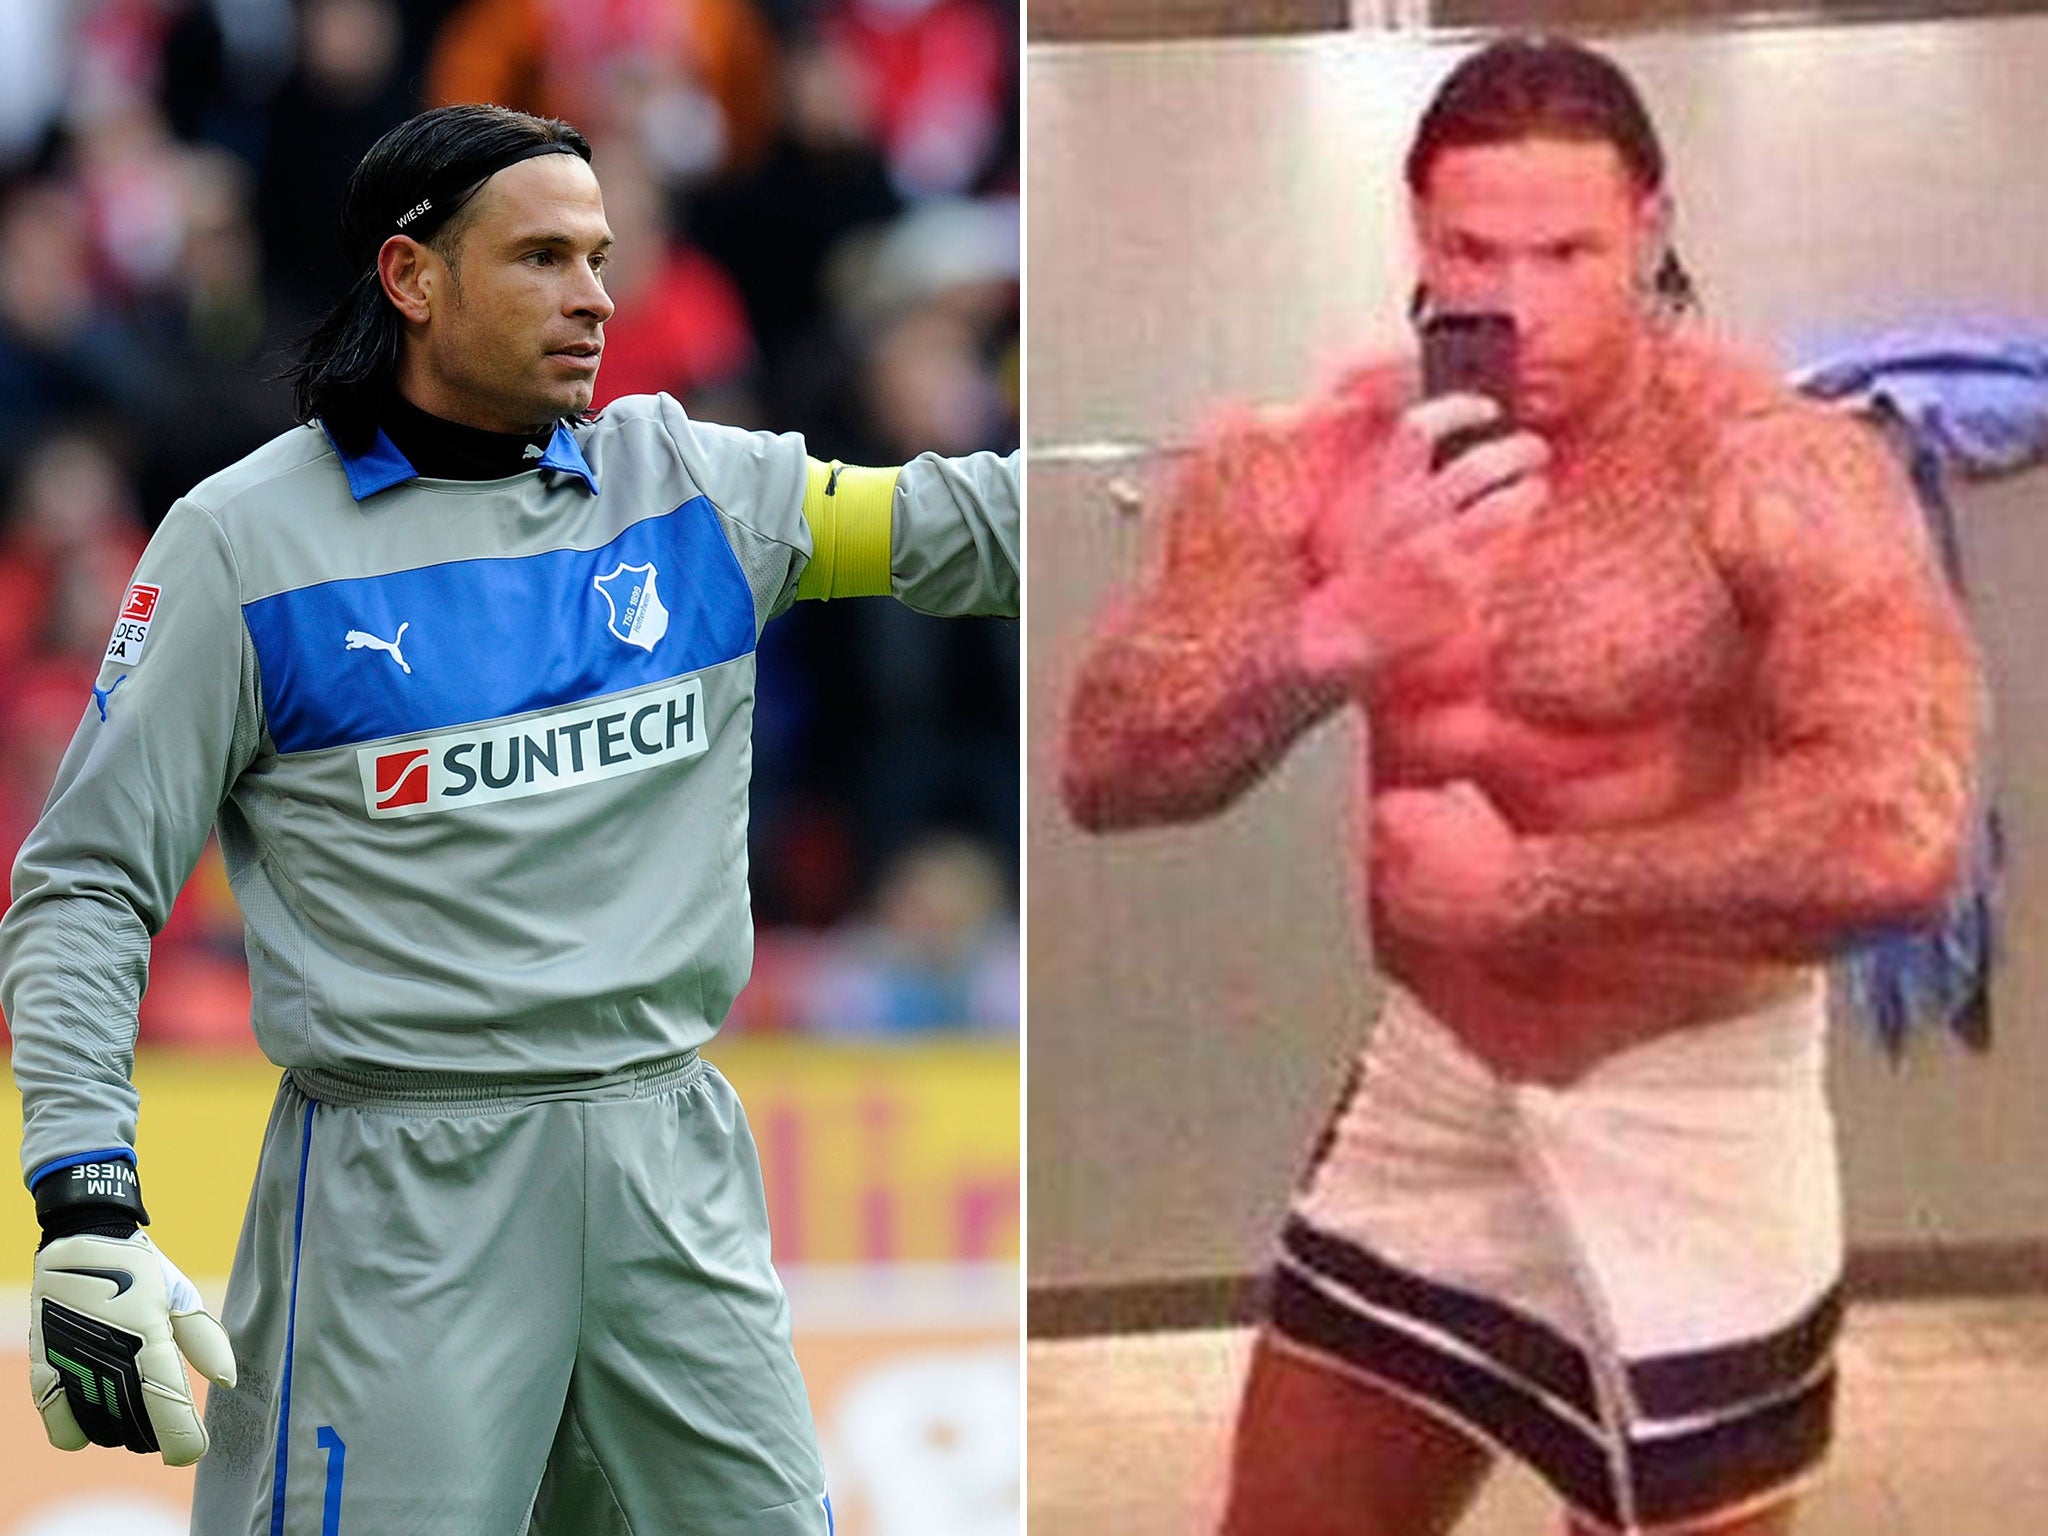 Tim Wiese pictured playing football in 2012 (L) and posing in front of a mirror two years later (R)